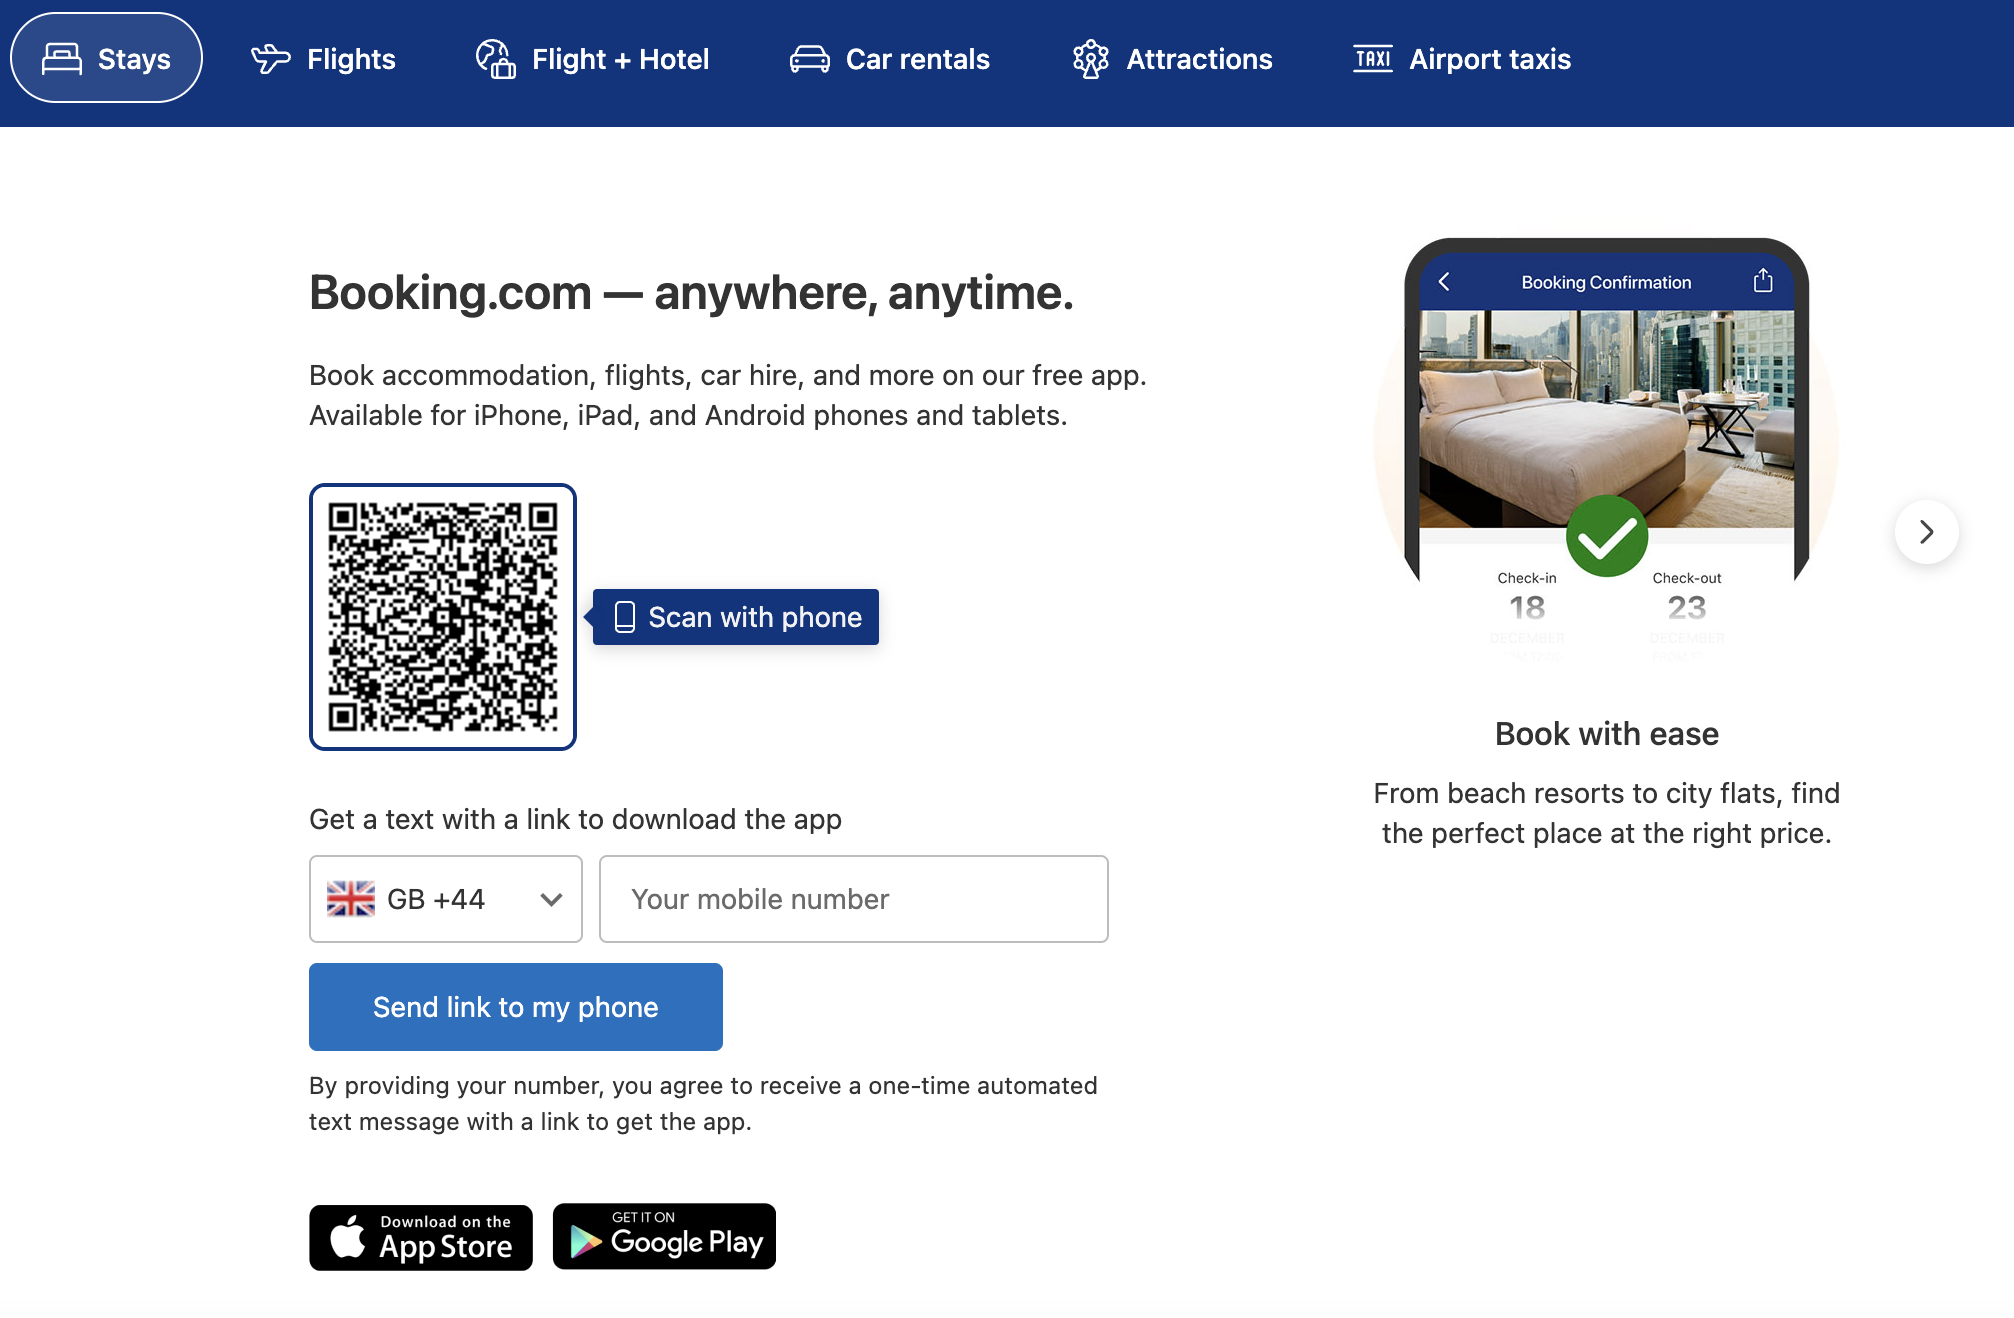 Booking.com is an example of a freemium service